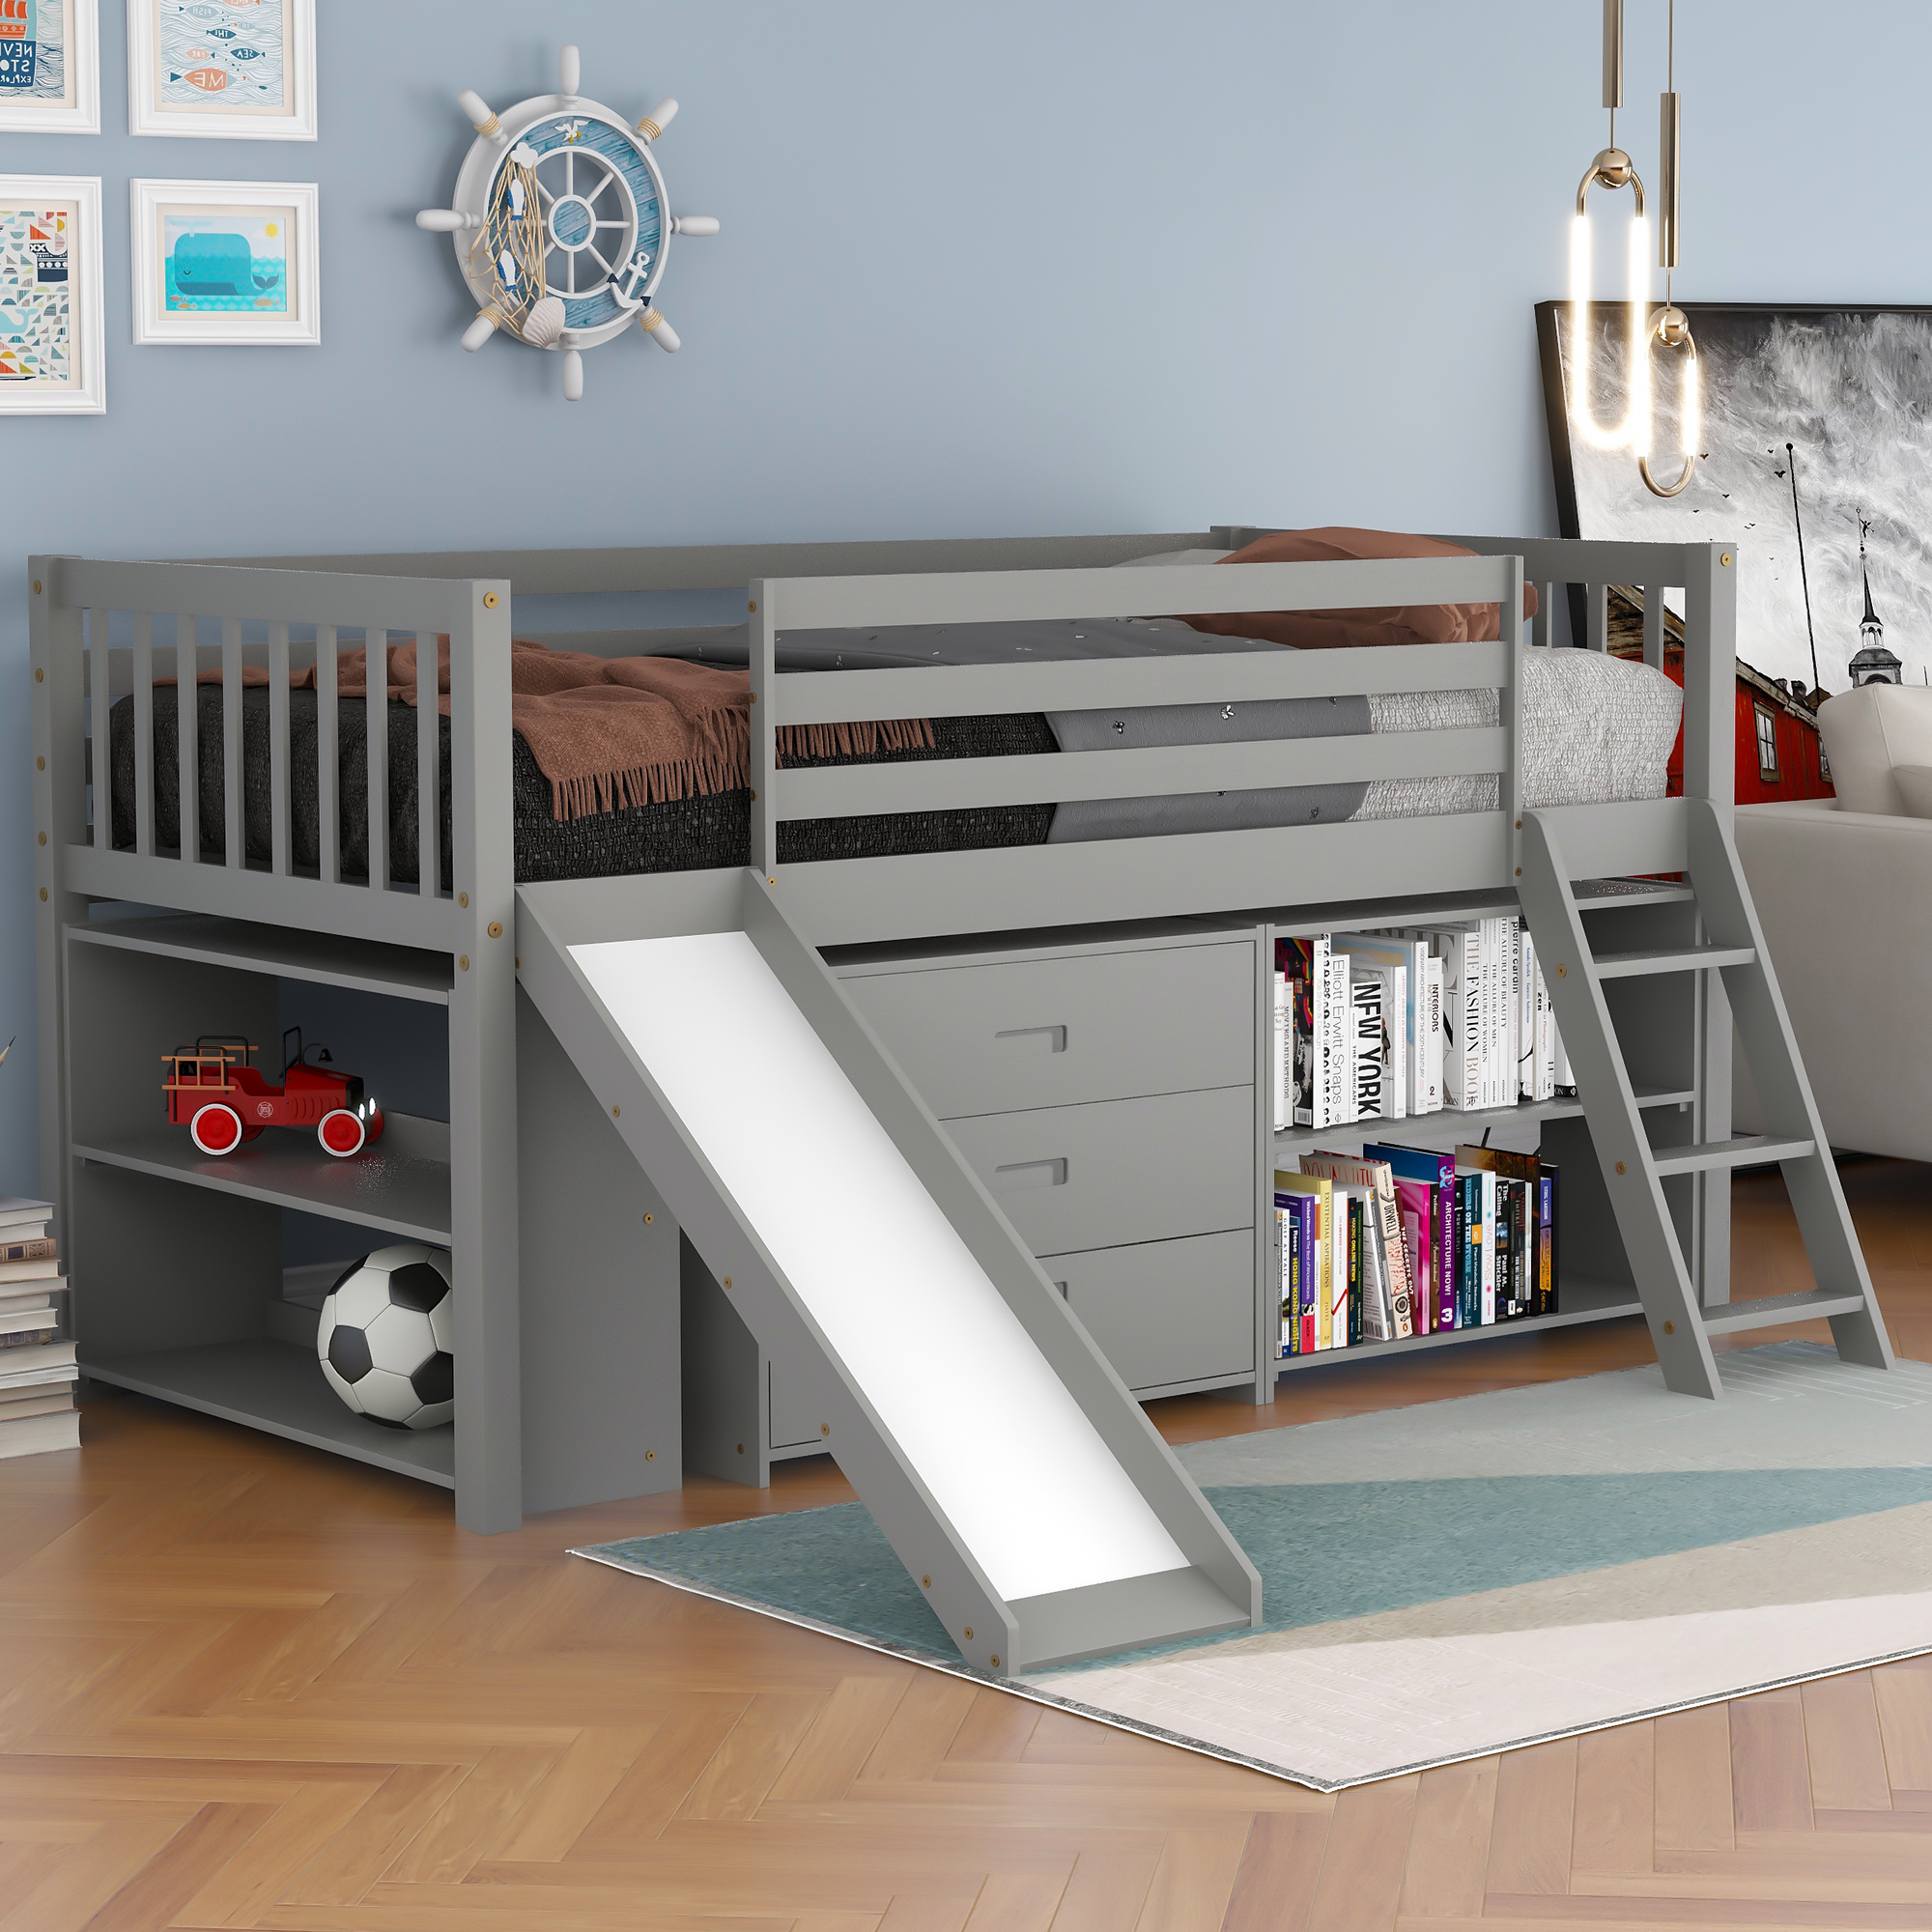 Euroco Wood Twin Size Low Loft Bed with Bookcase, Drawers, Ladder and Slide, Gray - image 2 of 12